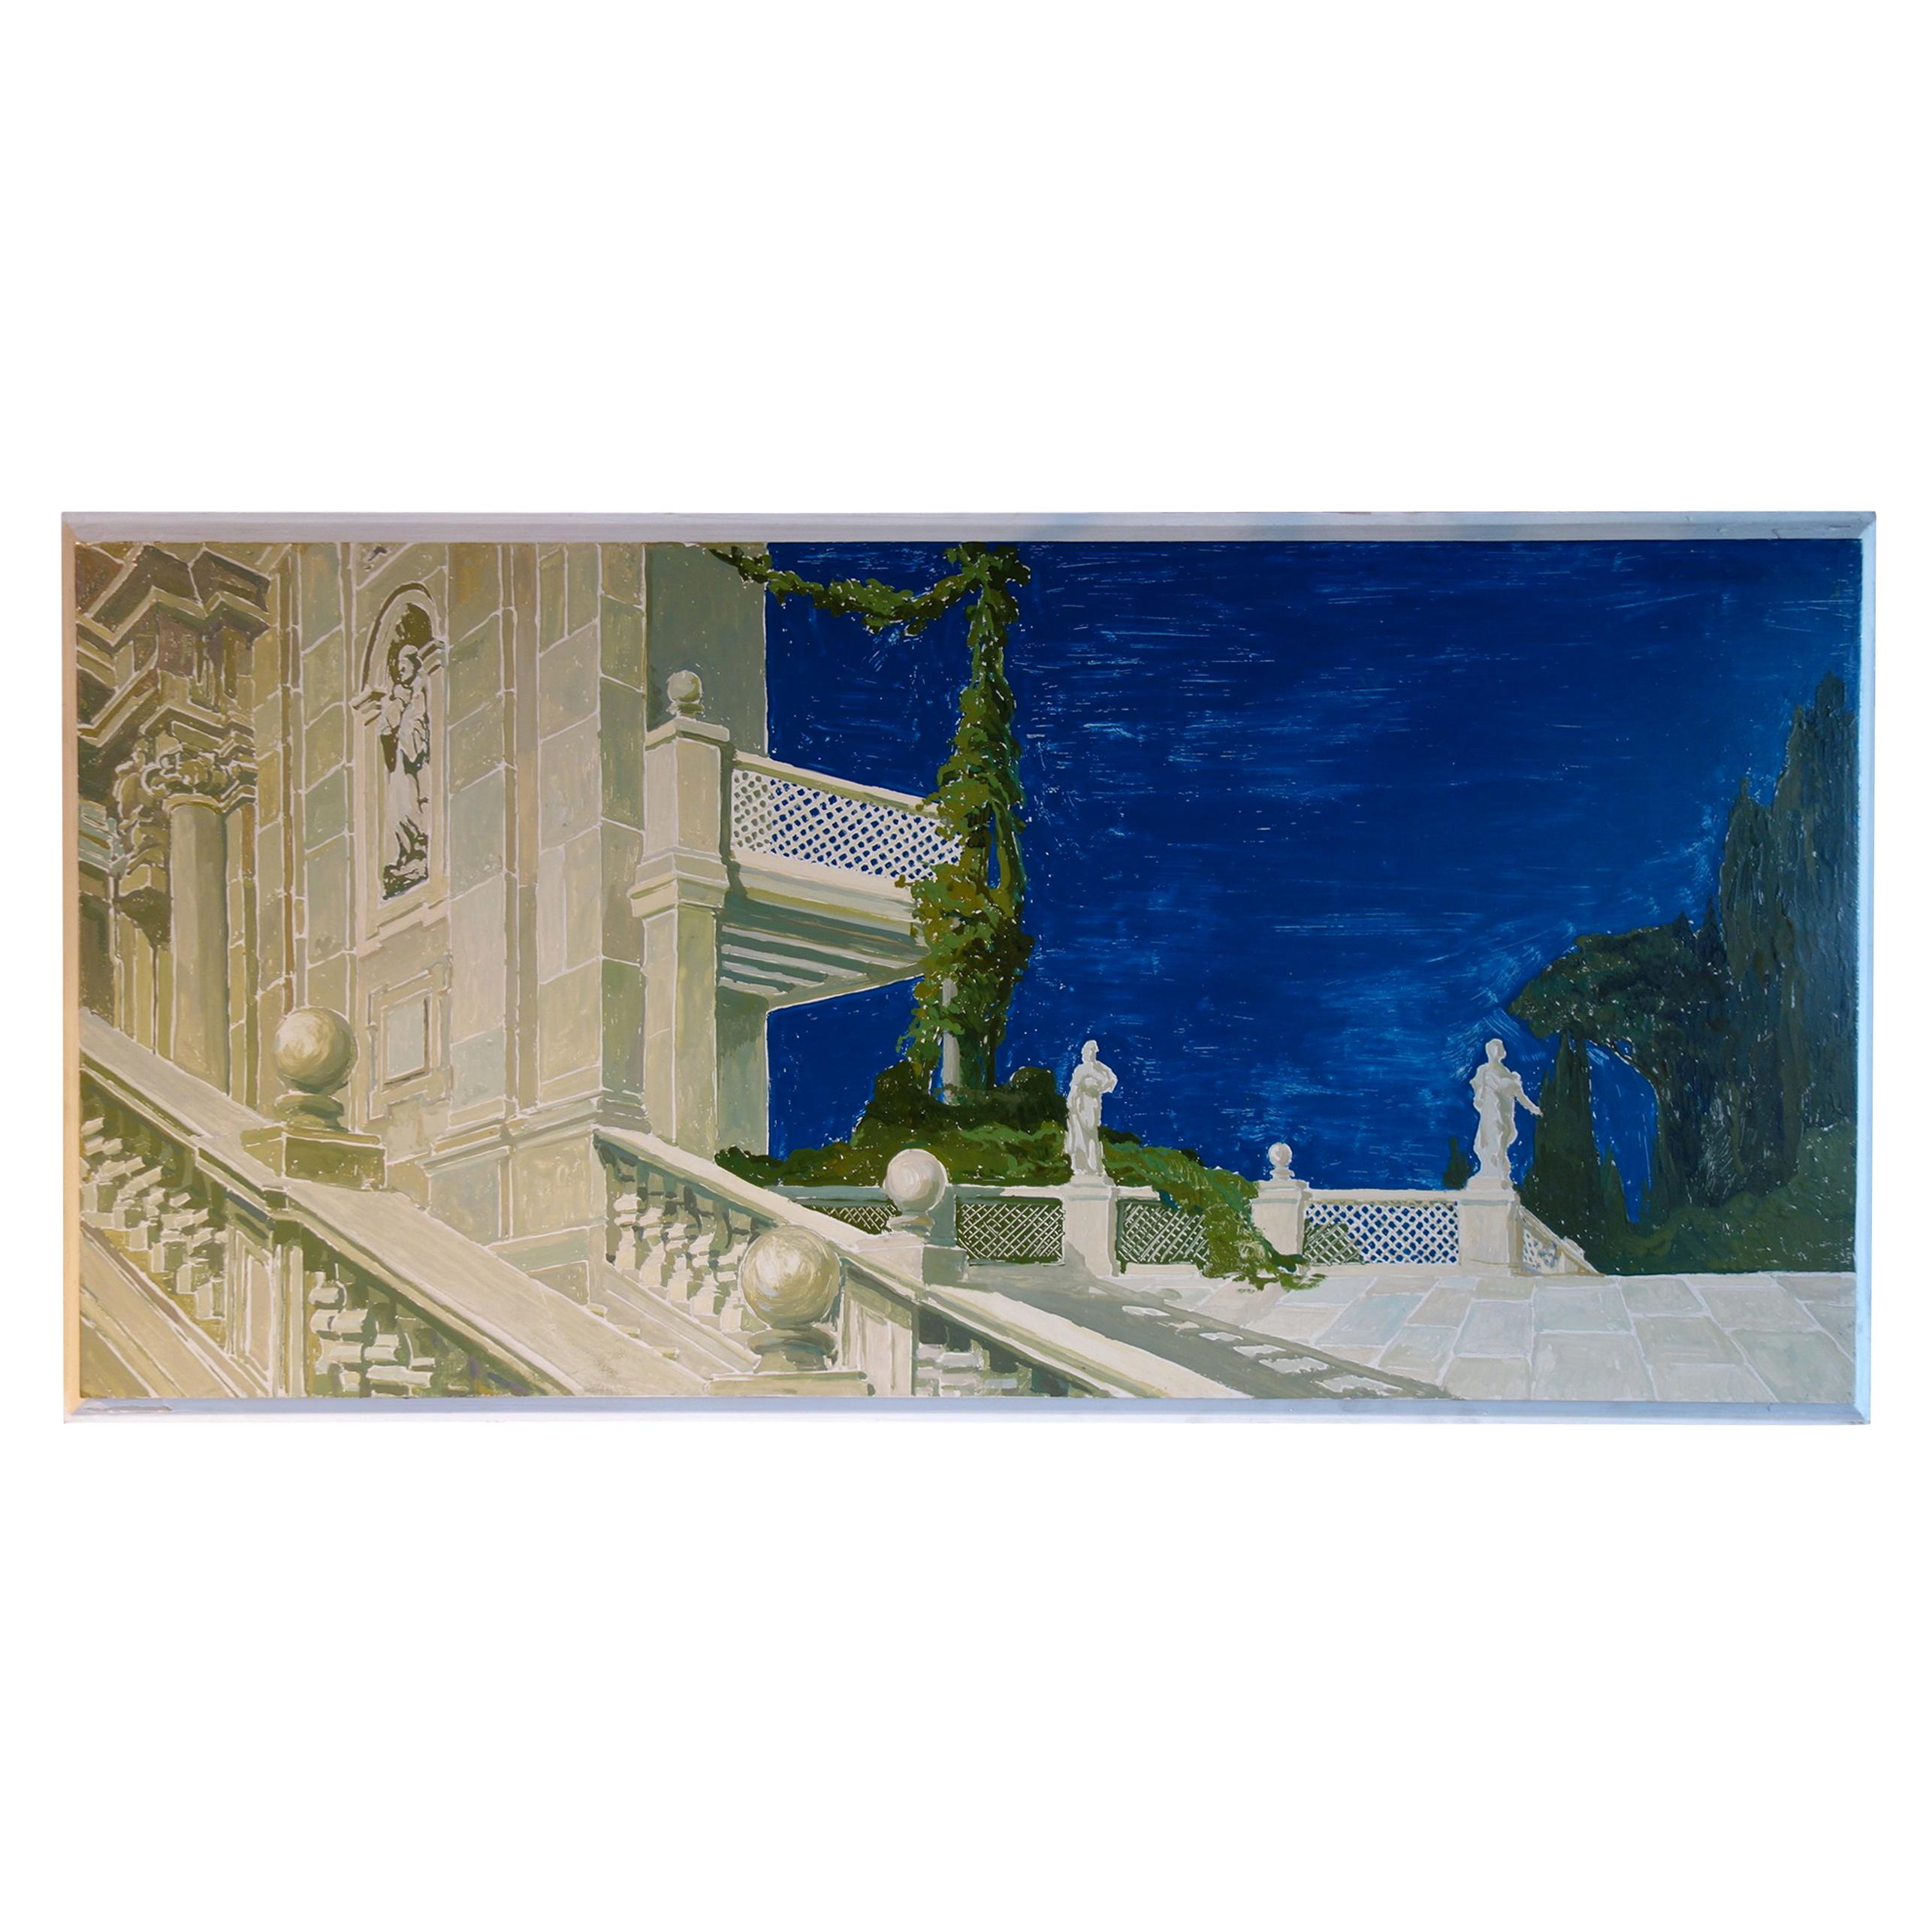 Study for a Painting of a Classic Italian Garden with Staircase on Board